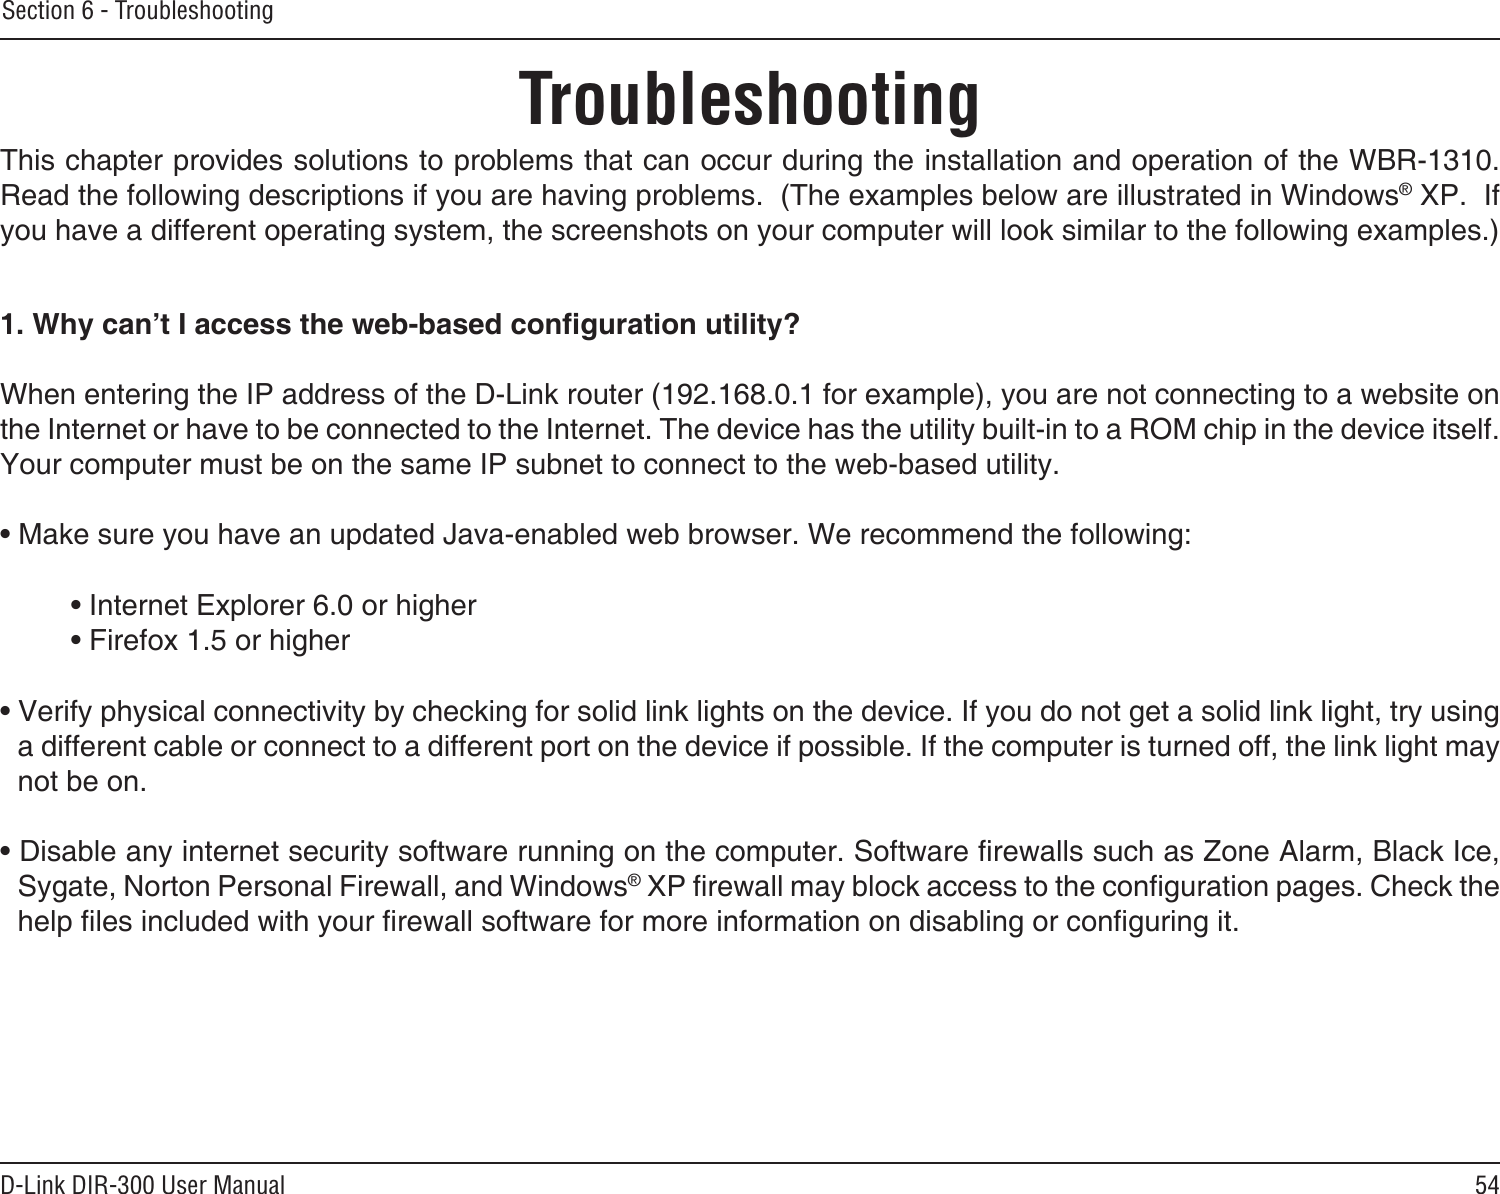 54D-Link DIR-300 User ManualSection 6 - TroubleshootingTroubleshootingThis chapter provides solutions to problems that can occur during the installation and operation of the WBR-1310.  Read the following descriptions if you are having problems.  (The examples below are illustrated in Windows® XP.  If you have a different operating system, the screenshots on your computer will look similar to the following examples.)1. Why can’t I access the web-based conguration utility?When entering the IP address of the D-Link router (192.168.0.1 for example), you are not connecting to a website on the Internet or have to be connected to the Internet. The device has the utility built-in to a ROM chip in the device itself. Your computer must be on the same IP subnet to connect to the web-based utility. • Make sure you have an updated Java-enabled web browser. We recommend the following: • Internet Explorer 6.0 or higher • Firefox 1.5 or higher • Verify physical connectivity by checking for solid link lights on the device. If you do not get a solid link light, try using a different cable or connect to a different port on the device if possible. If the computer is turned off, the link light may not be on.• Disable any internet security software running on the computer. Software rewalls such as Zone Alarm, Black Ice, Sygate, Norton Personal Firewall, and Windows® XP rewall may block access to the conguration pages. Check the help les included with your rewall software for more information on disabling or conguring it.